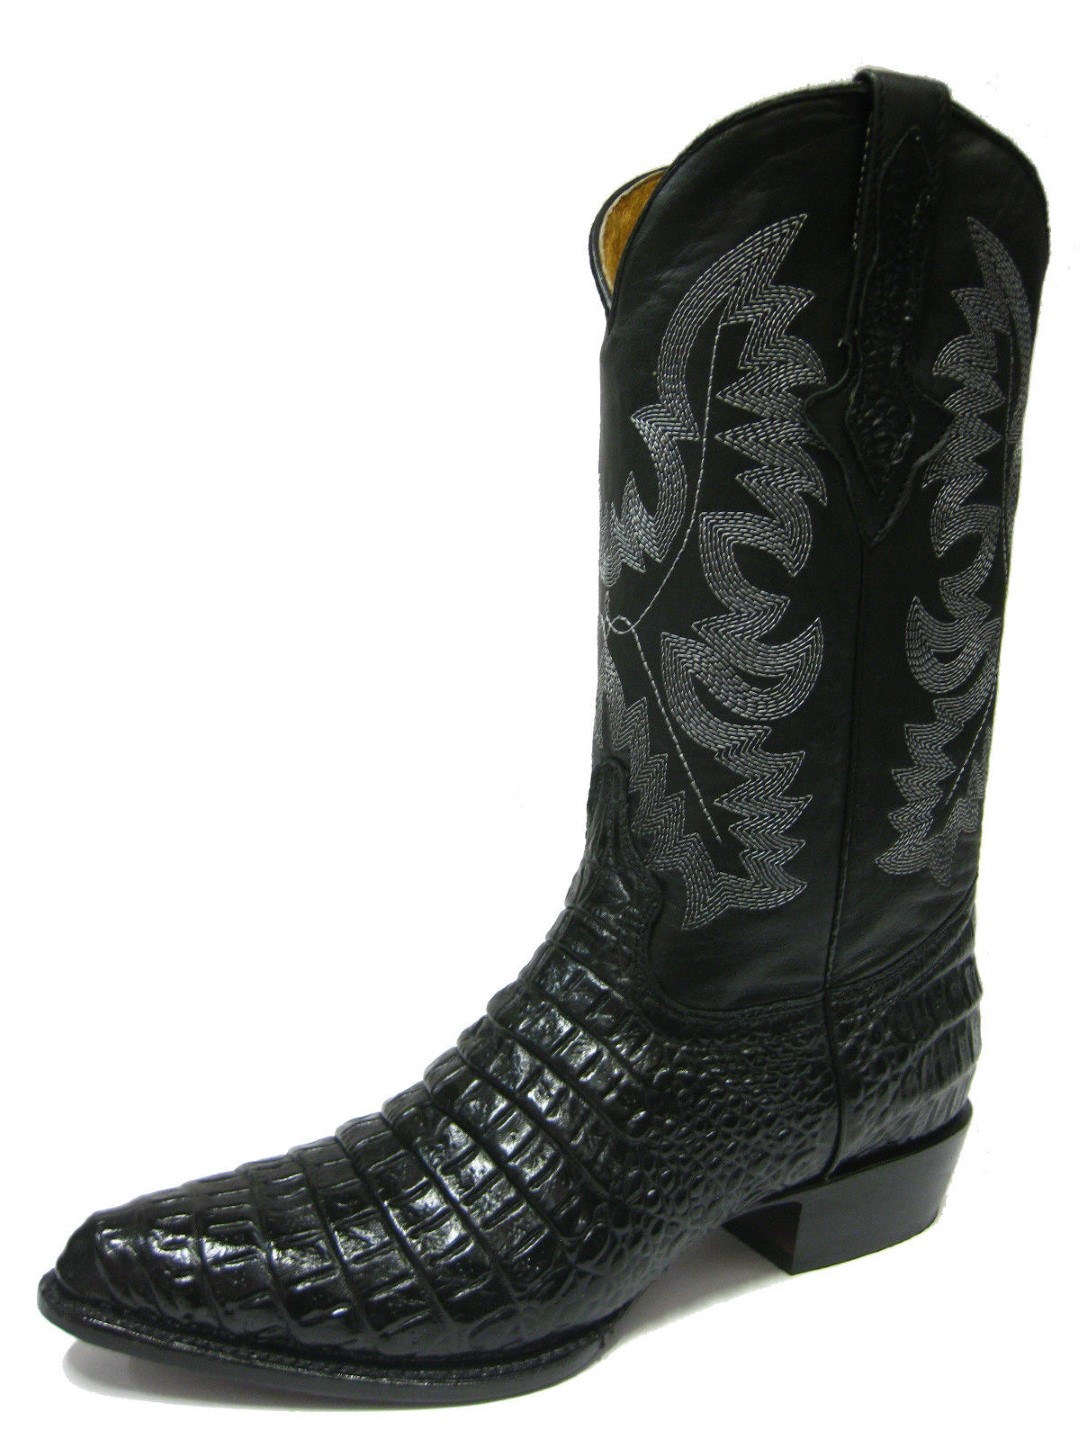 Mens  Black Crocodile Belly Exotic Western Leather Cowboy Boots Rodeo J Toe 